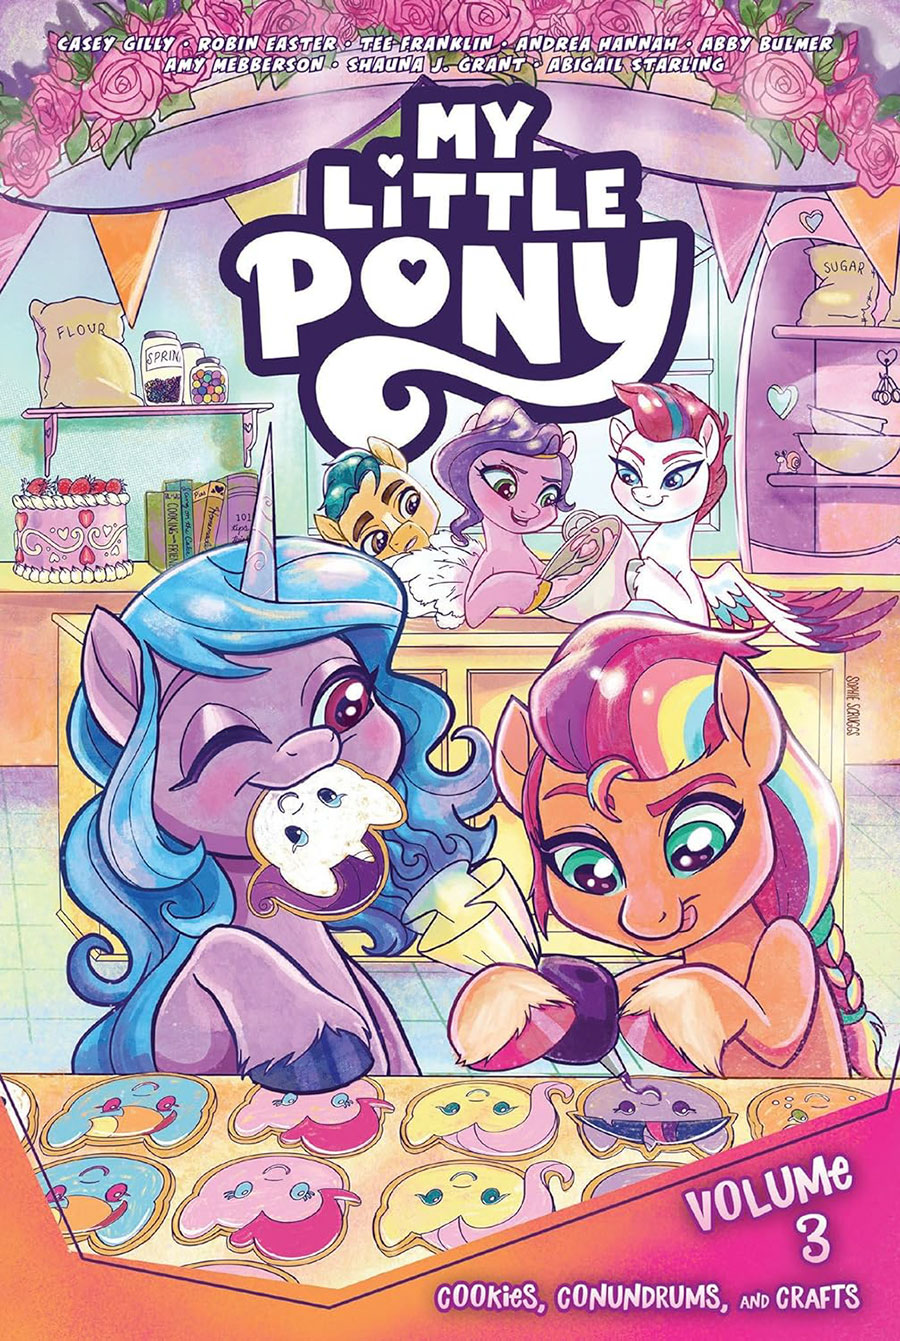 My Little Pony Vol 3 Cookies Conundrums & Crafts TP